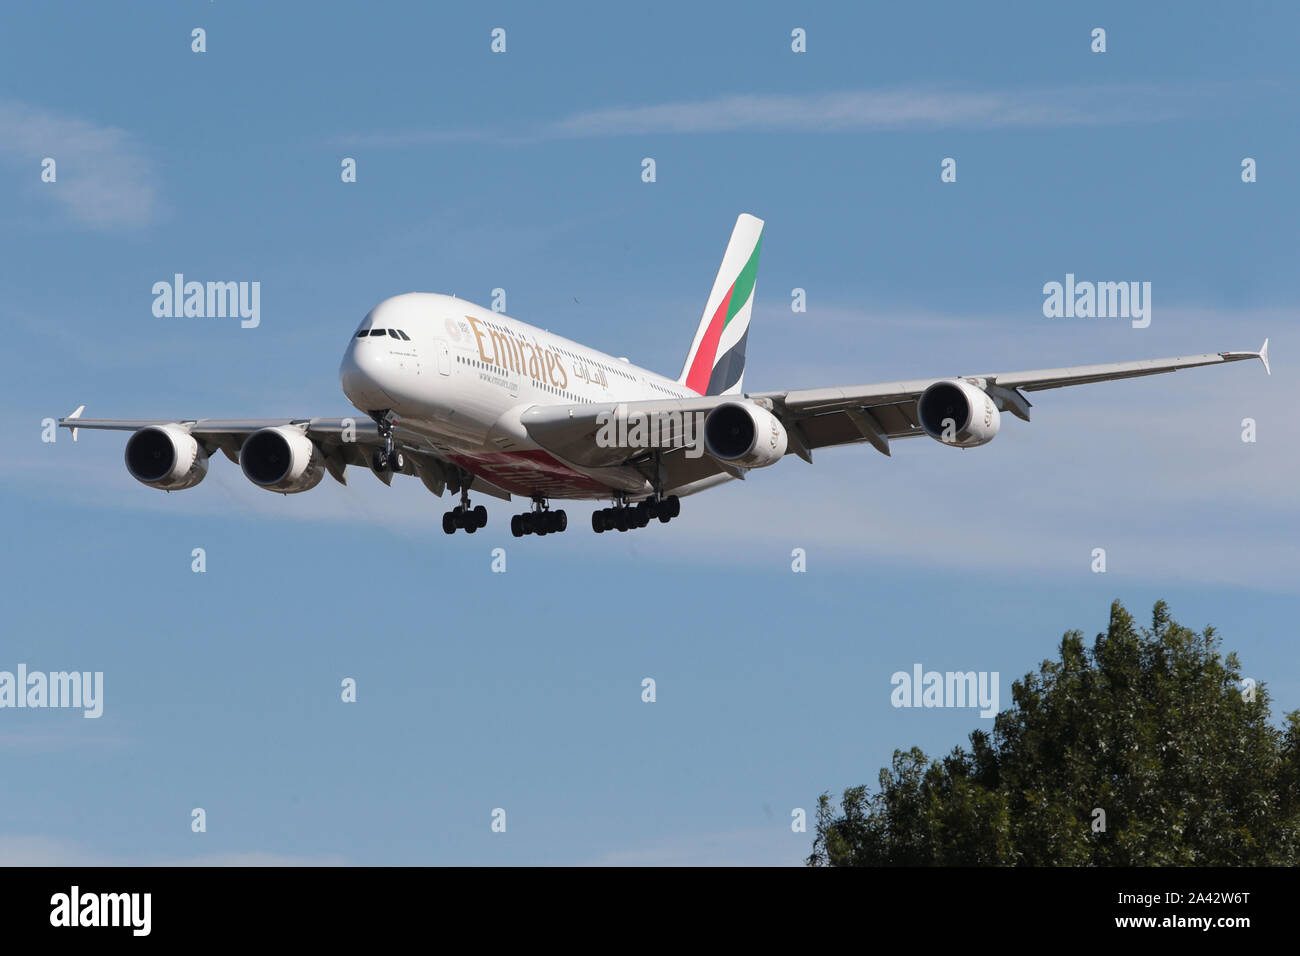 Emirates Airbus A380-800 double decker plane coming down to land at London Heathrow Airport in the United Kingdom Stock Photo